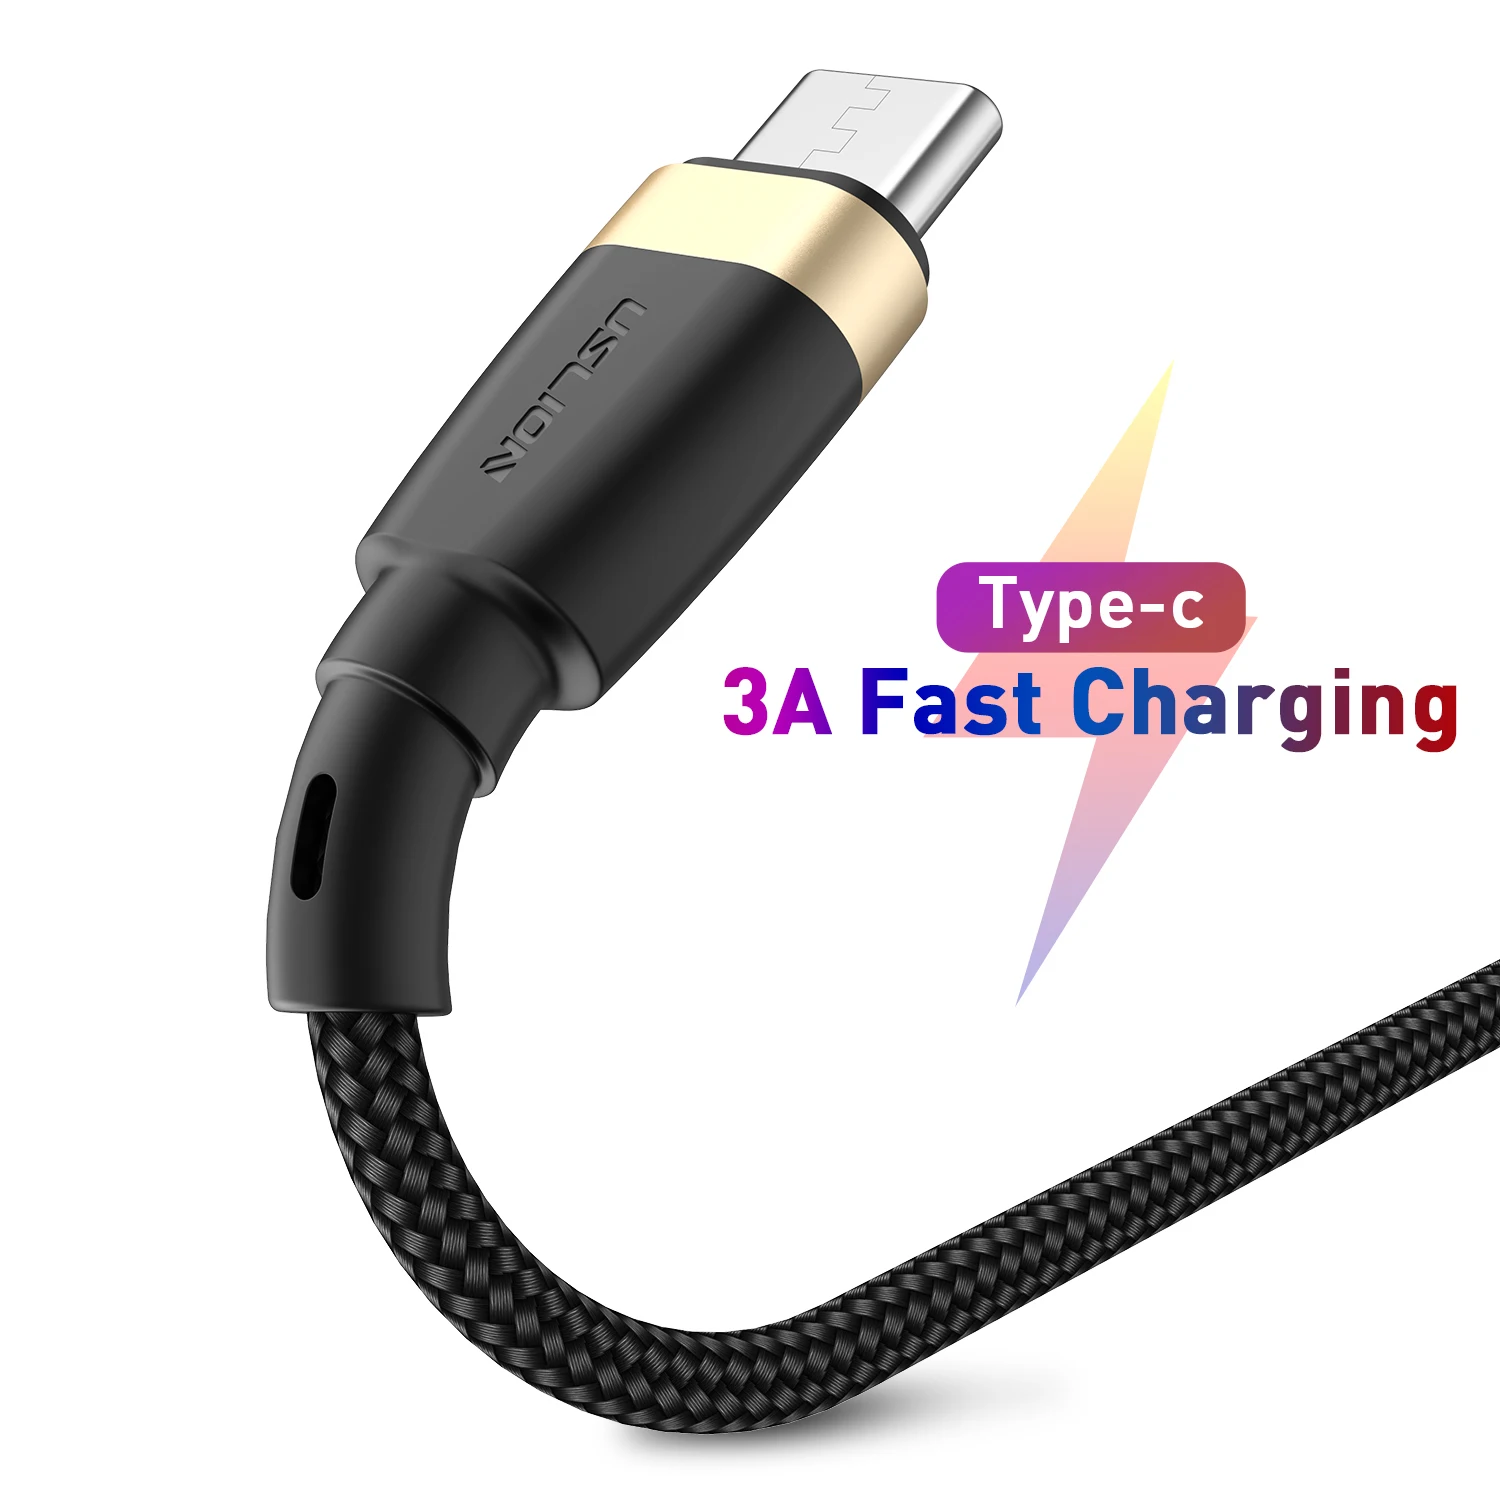 

0.5M 1M 2M 3M USLION Wholesale Mobile phone accessories QC3.0 usb type c 3A super fast charging cable, Red/grey/gold